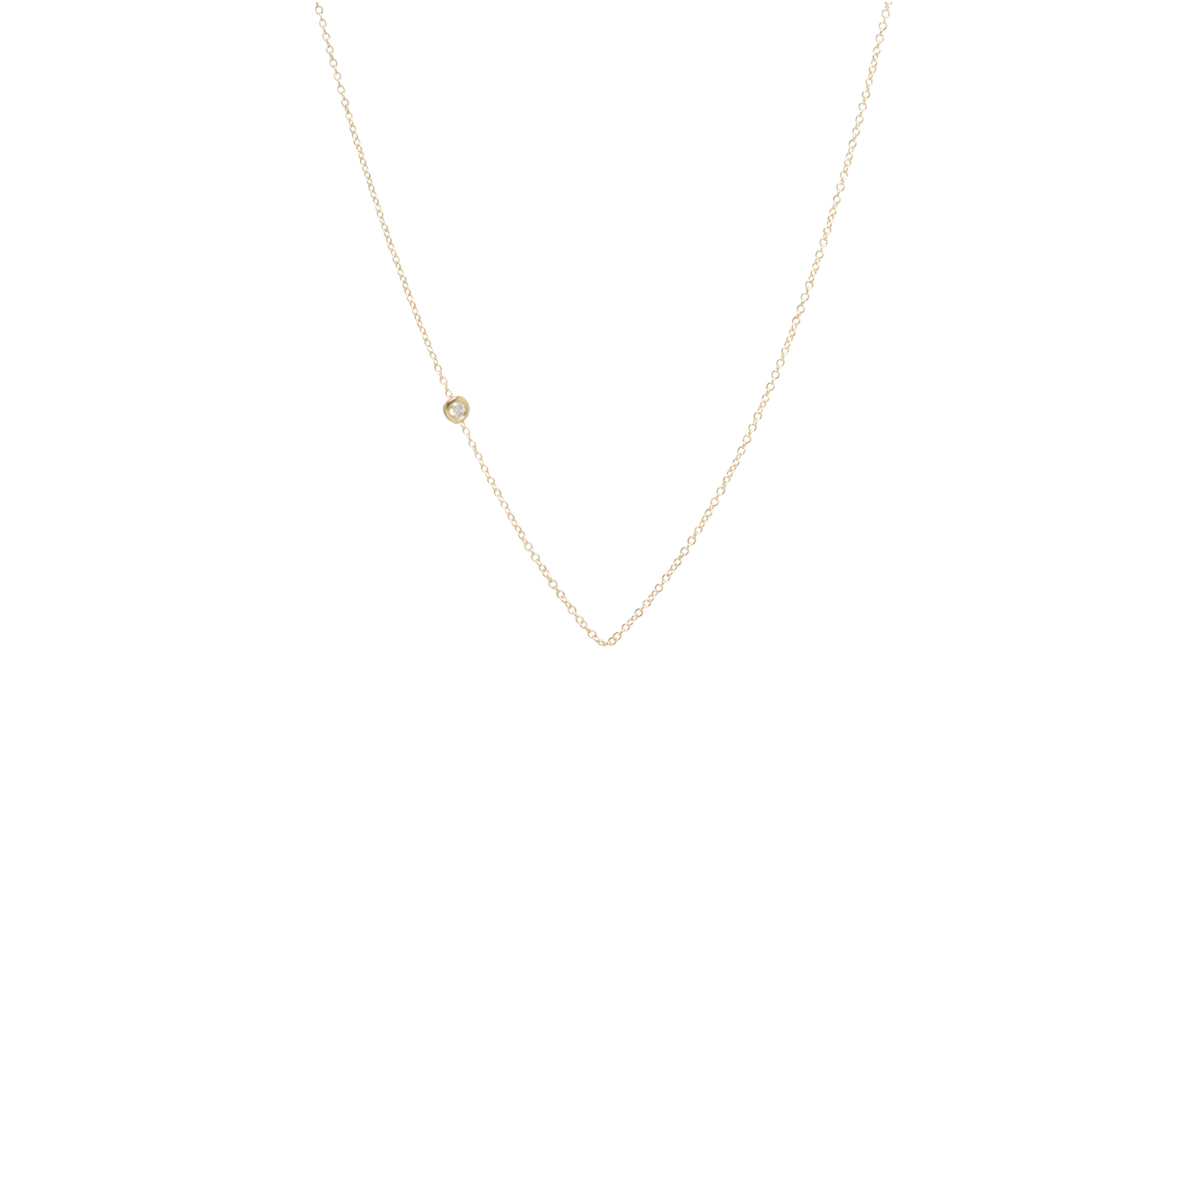 CHN-14K 14k Gold Chain with an Offset Floating 2mm White Diamond